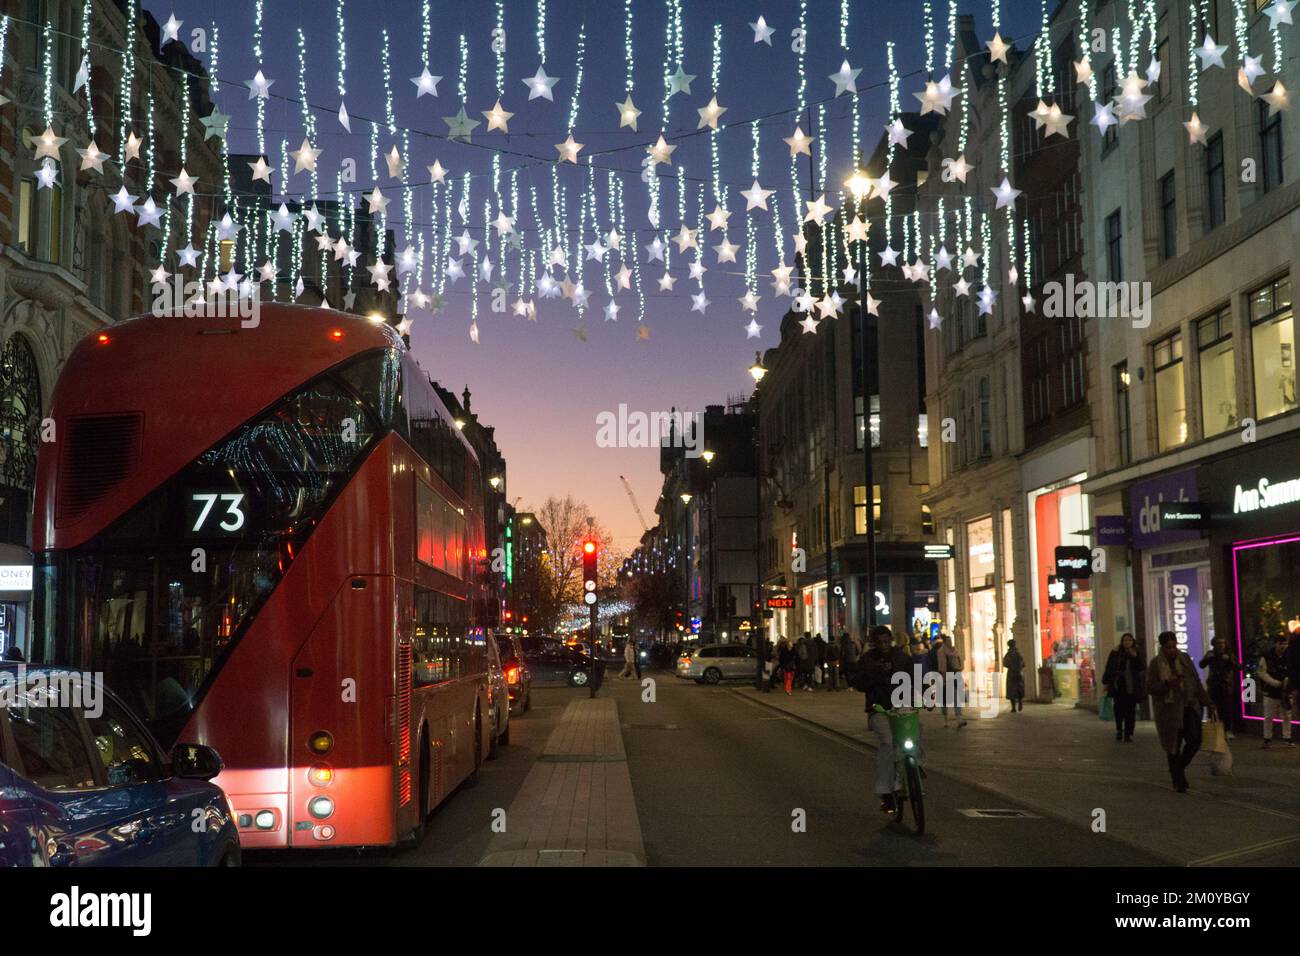 London, UK, 8 December 2022: Christmas lights add sparkle to the sunset sky at dusk on Oxford Street in the West End. Shoppers crowd the streets despite concerns about consumer confidence during the cost of living crisis. Anna Watson/Alamy Live News Stock Photo